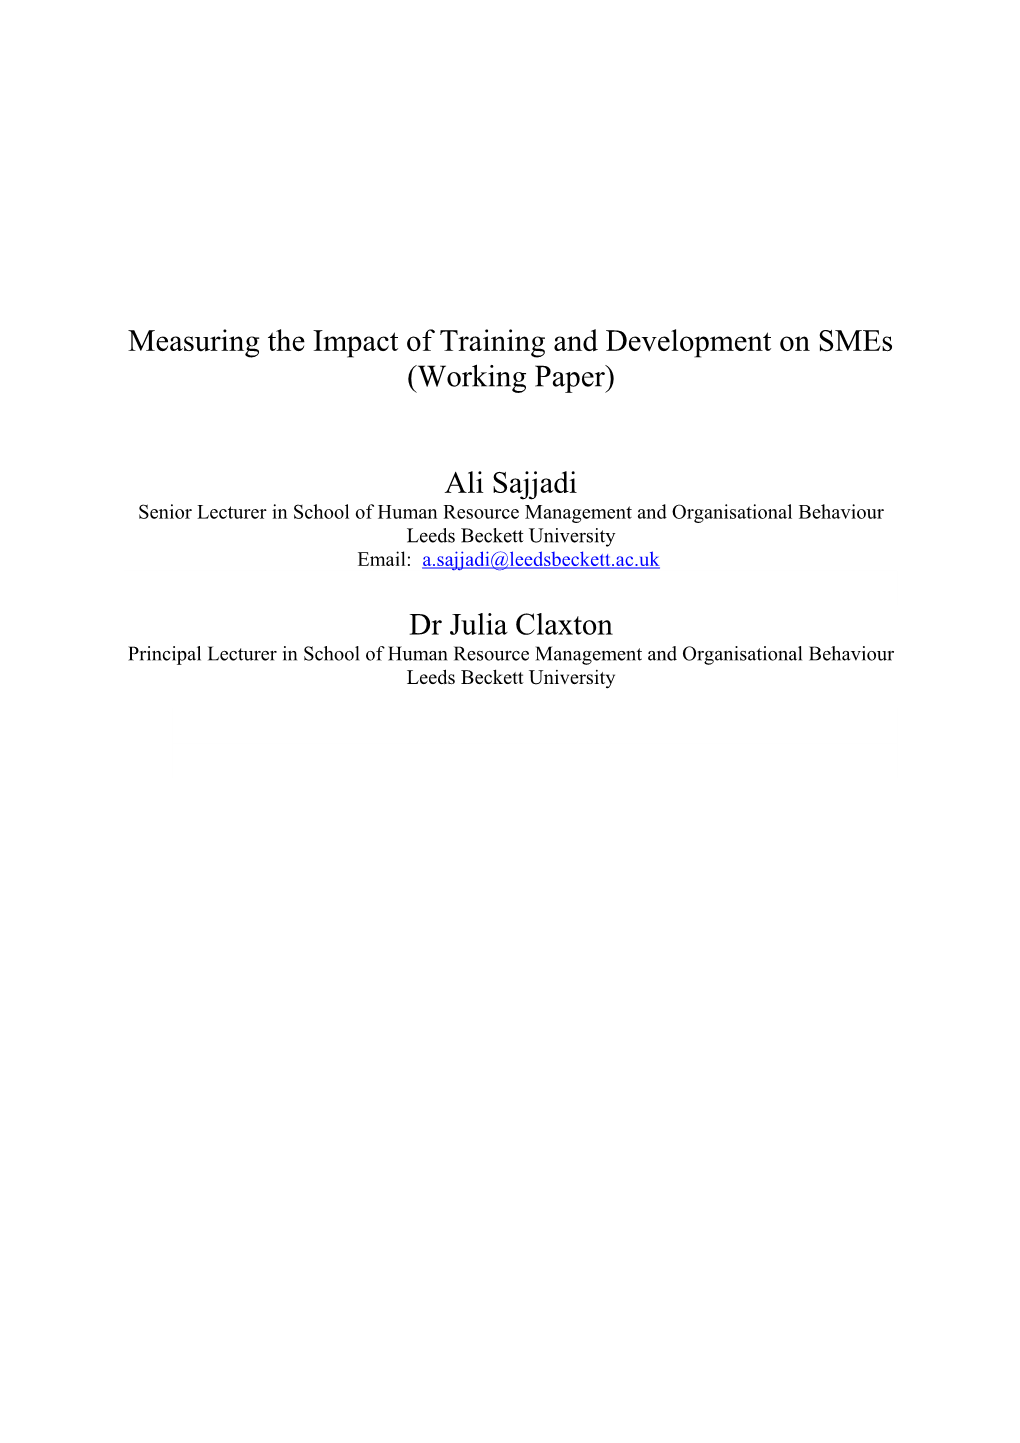 Measuring the Impact of Training and Development on Smes (Working Paper)